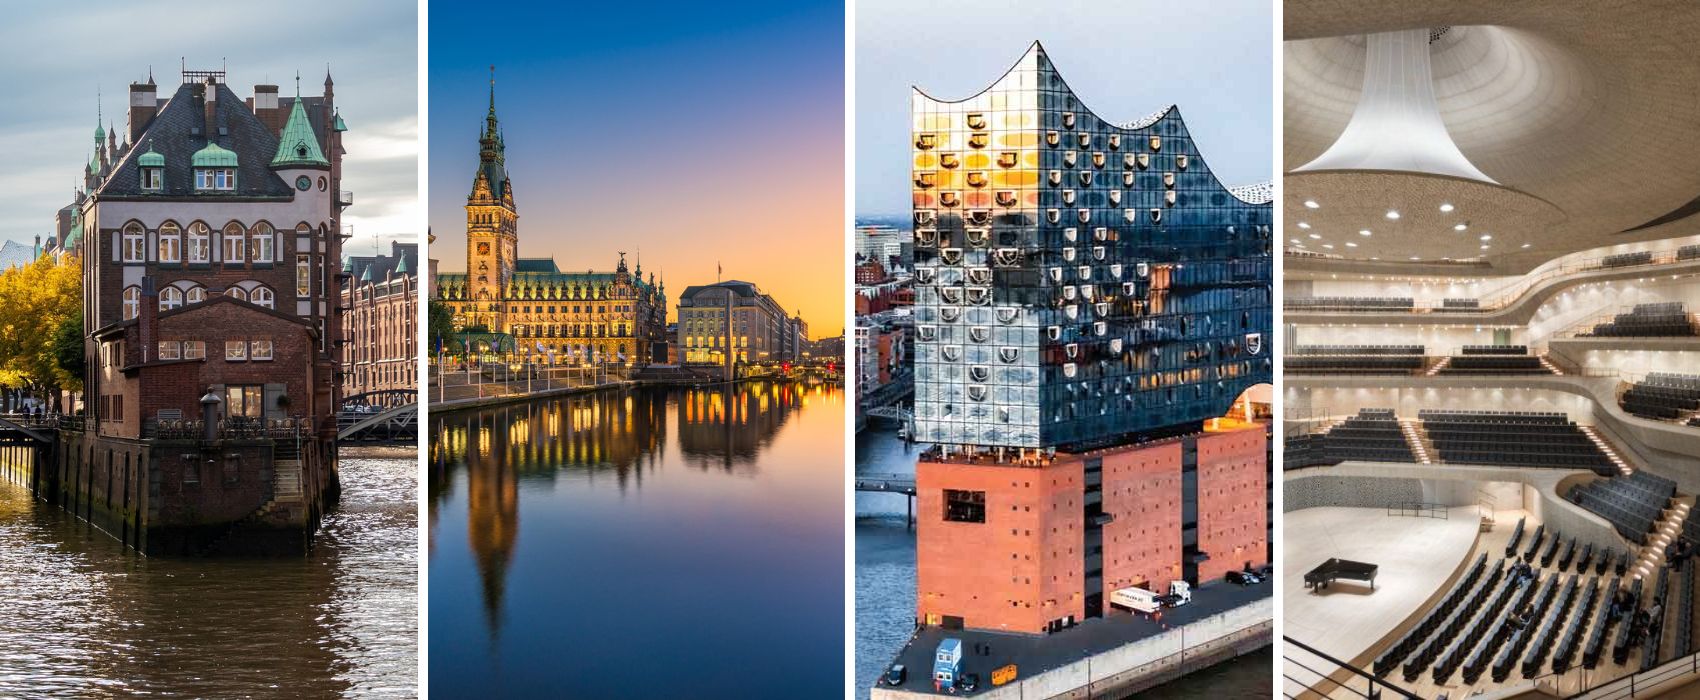  Hamburg from 5 to 8/5: Concert at the Elbphilharmonie and Norma at the Opera, Hamburg in style!